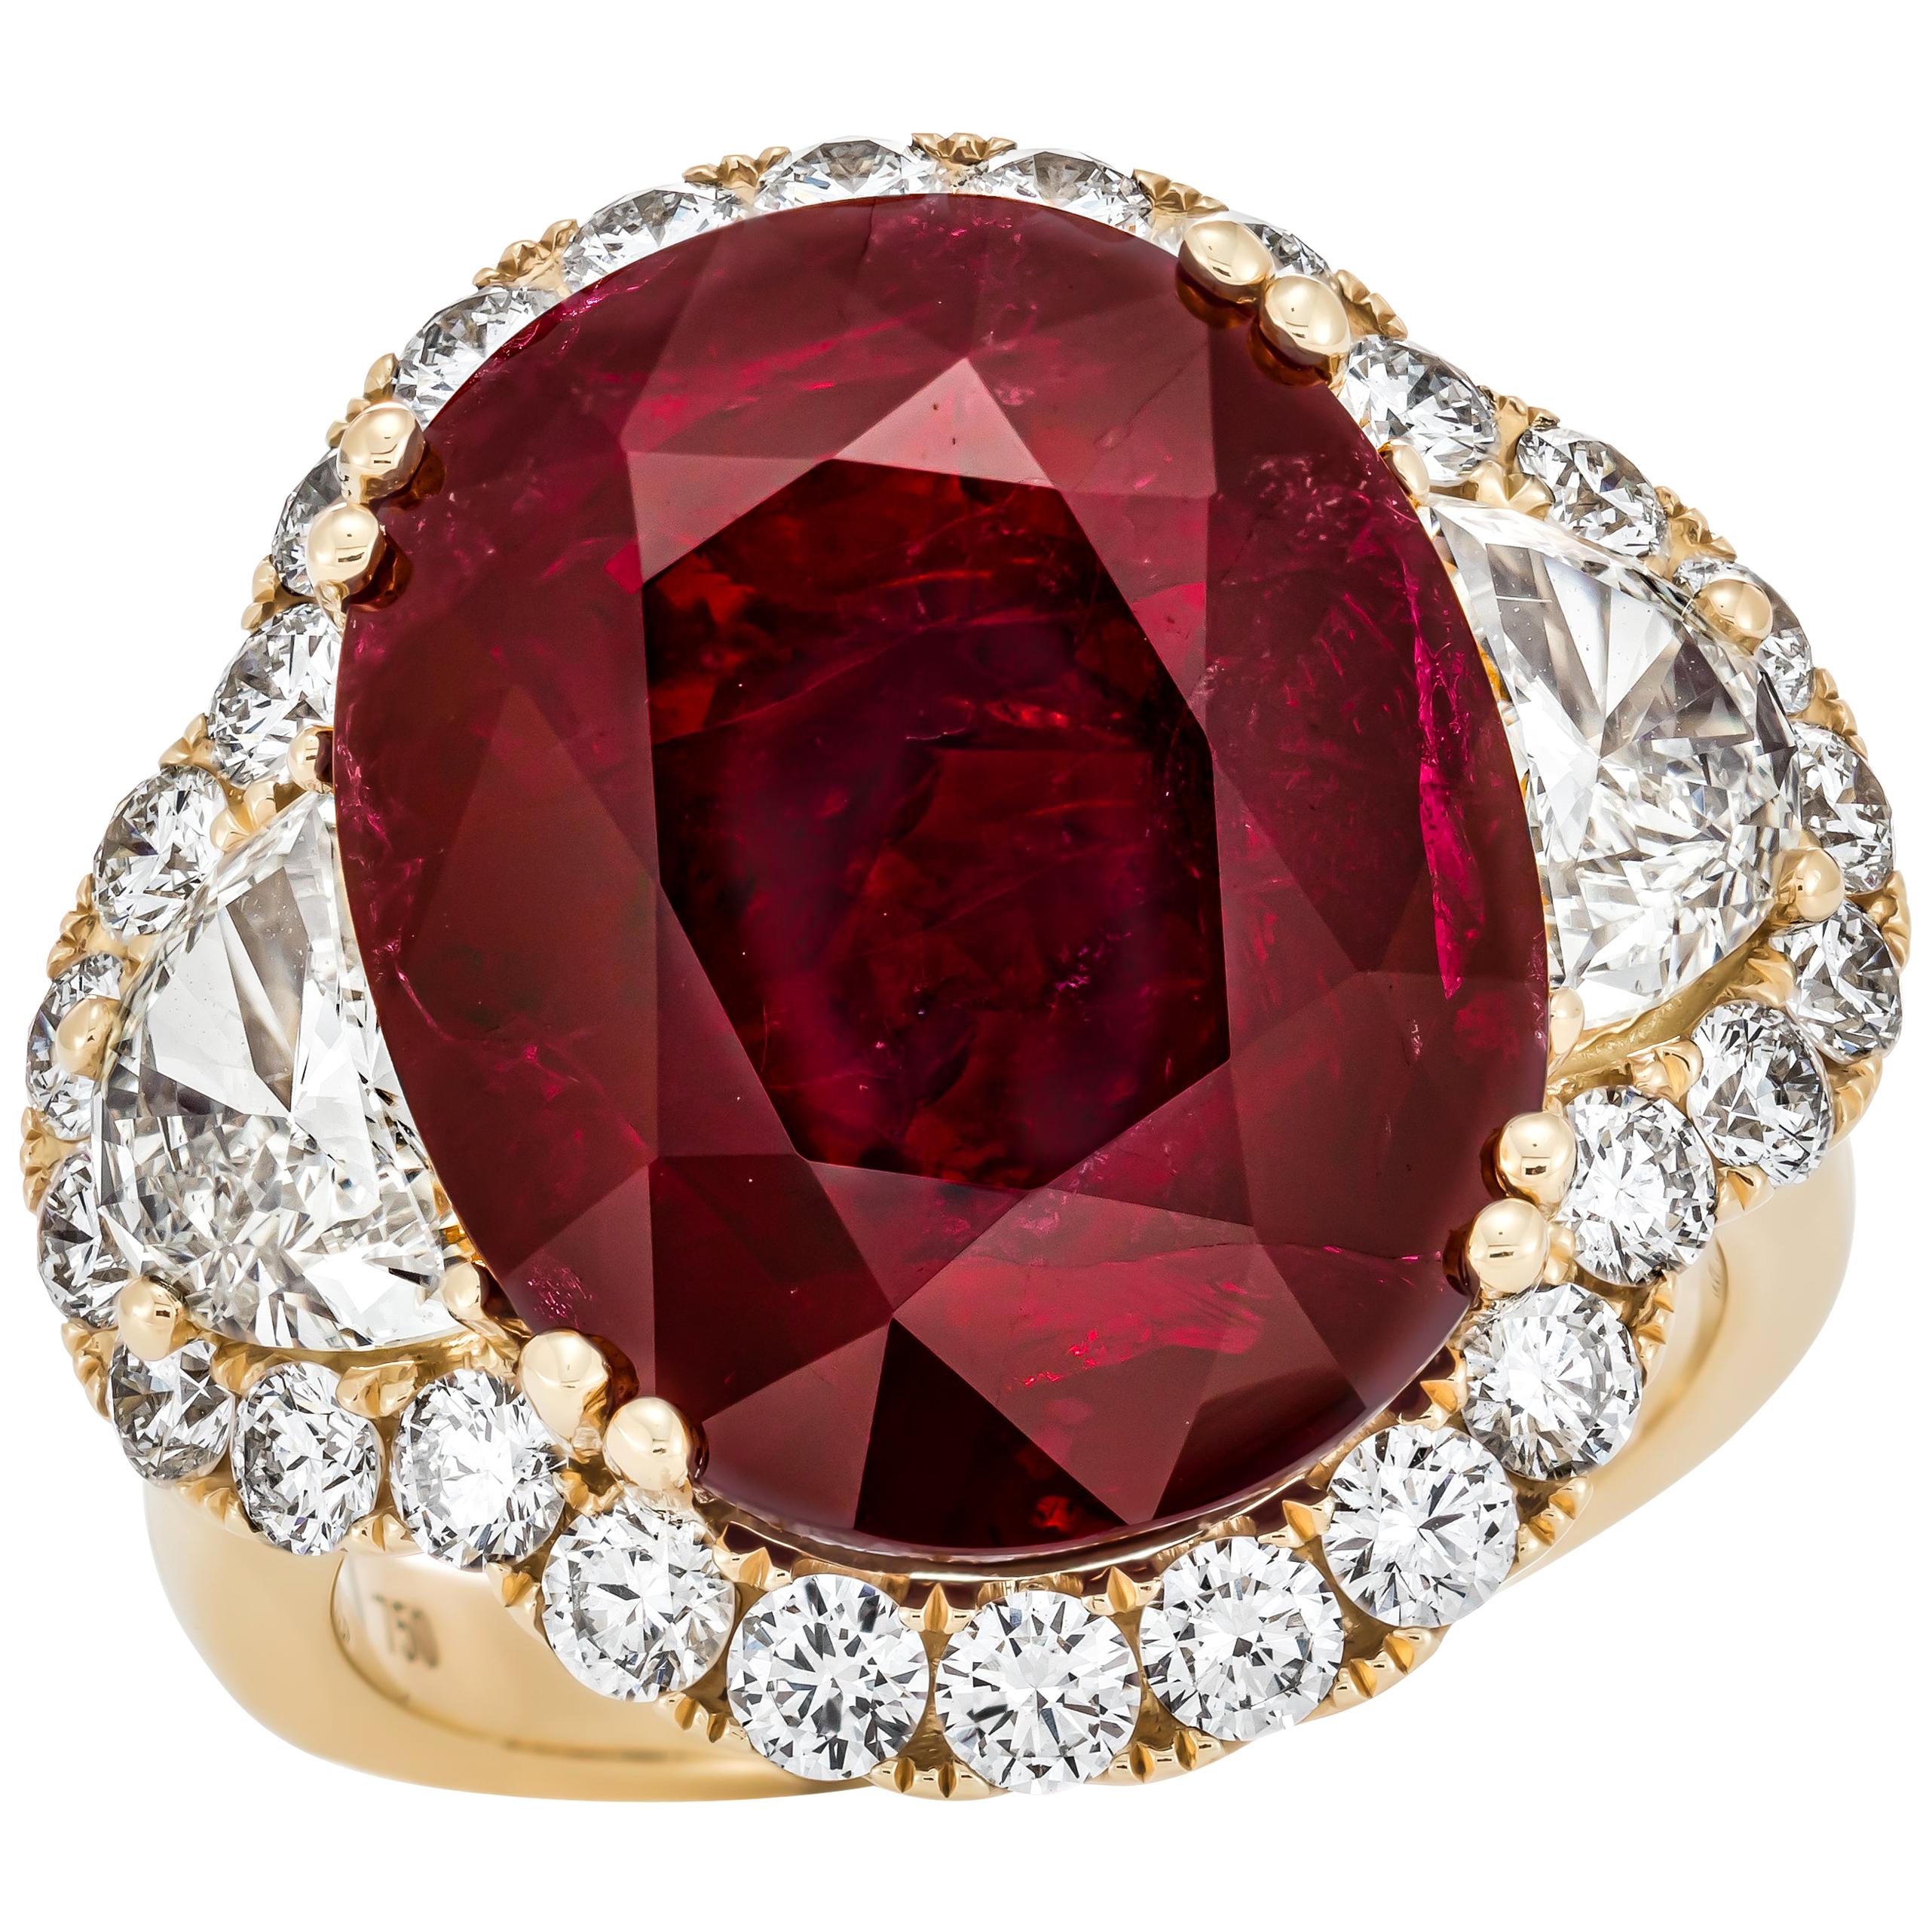 12.52 Carat Mozambique Red Oval Ruby and diamonds Ring GRS Certified For Sale